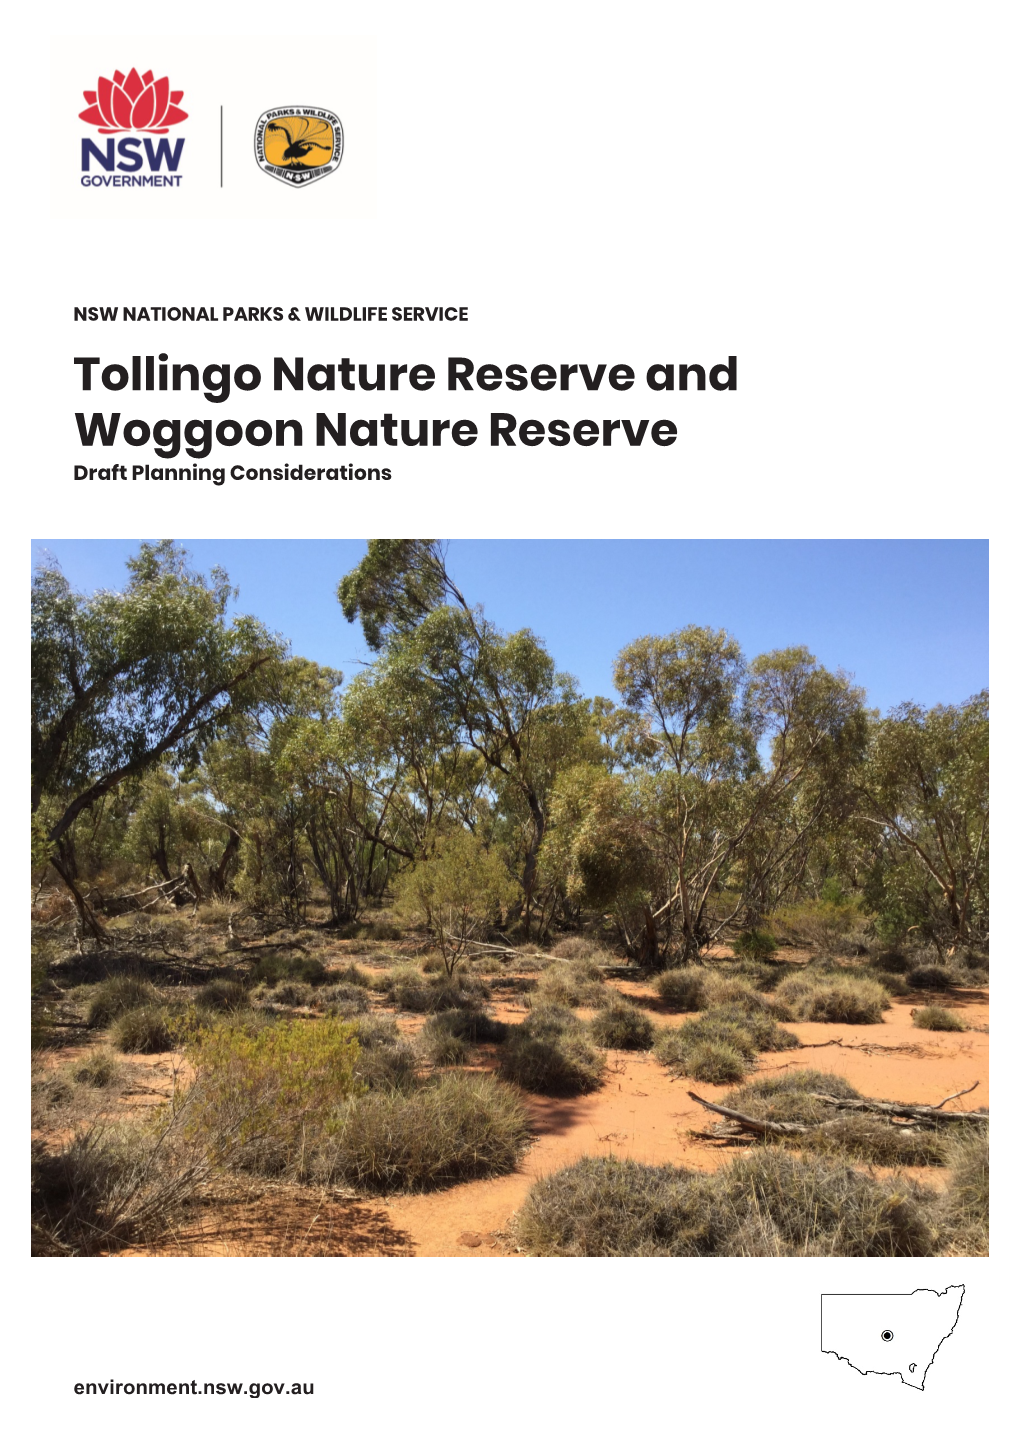 Tollingo Nature Reserve and Woggoon Nature Reserve Draft Planning Considerations